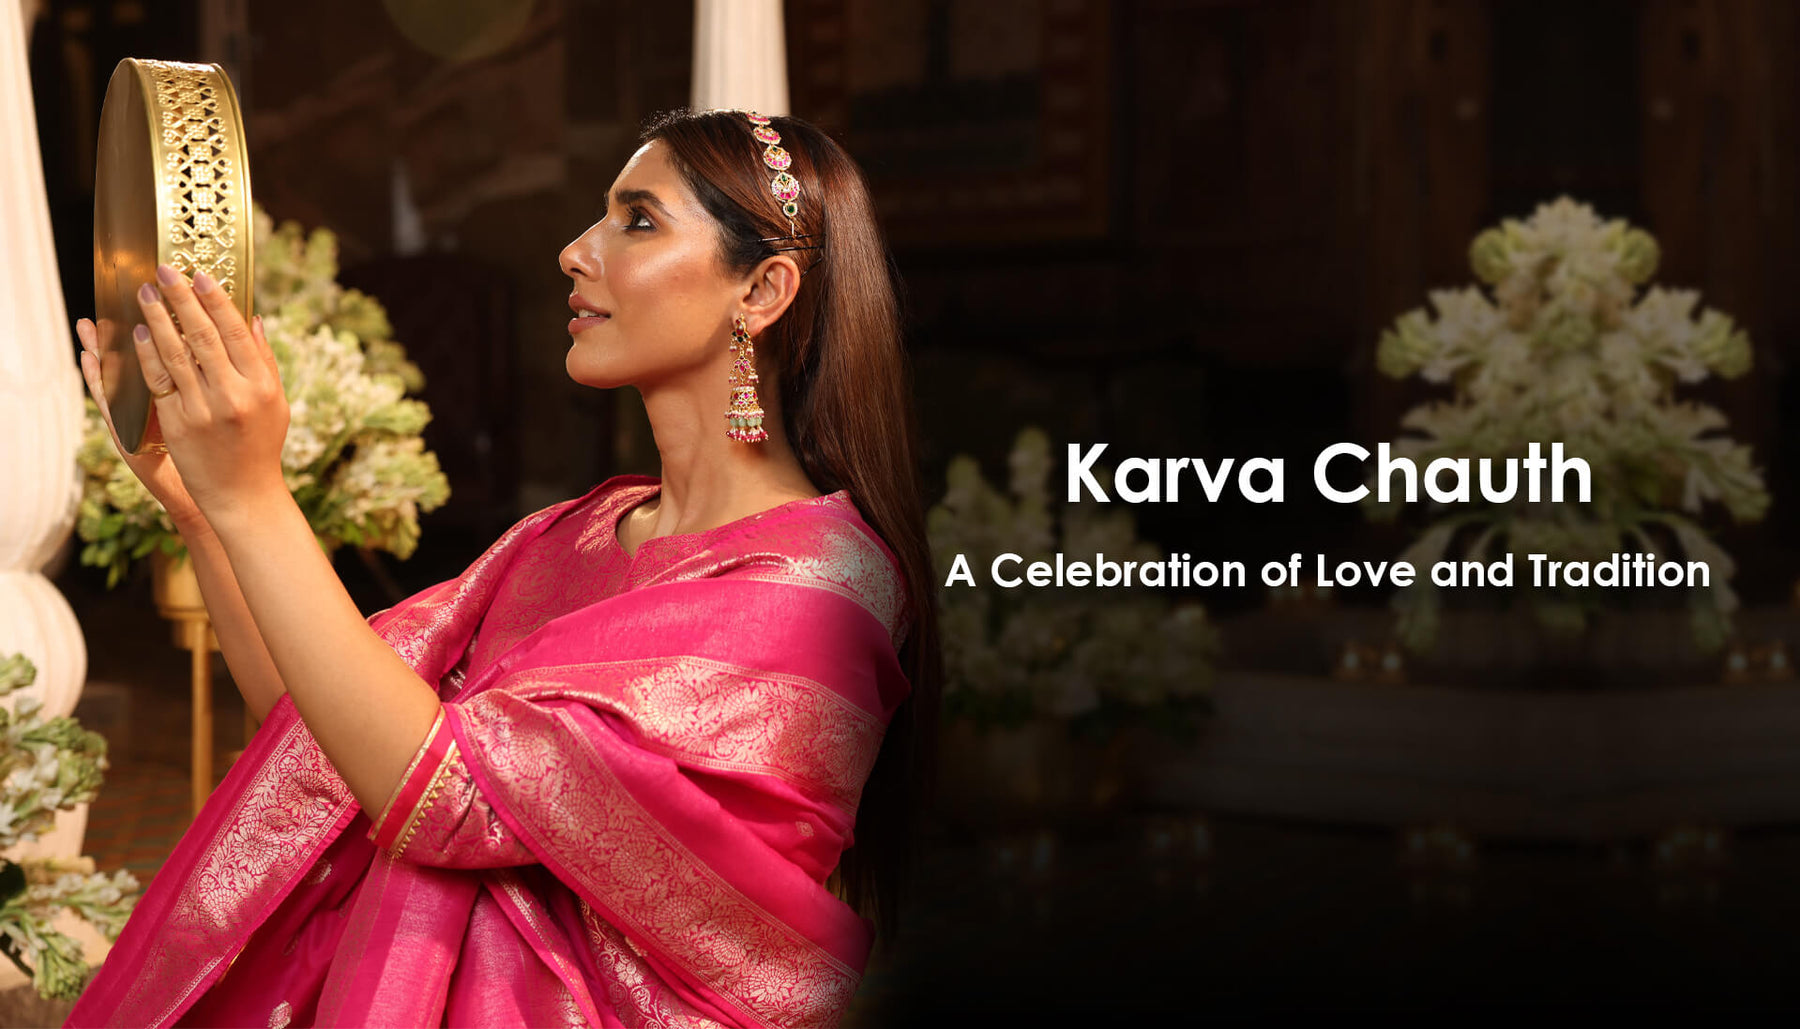 Karva Chauth: A Celebration Of Love And Tradition